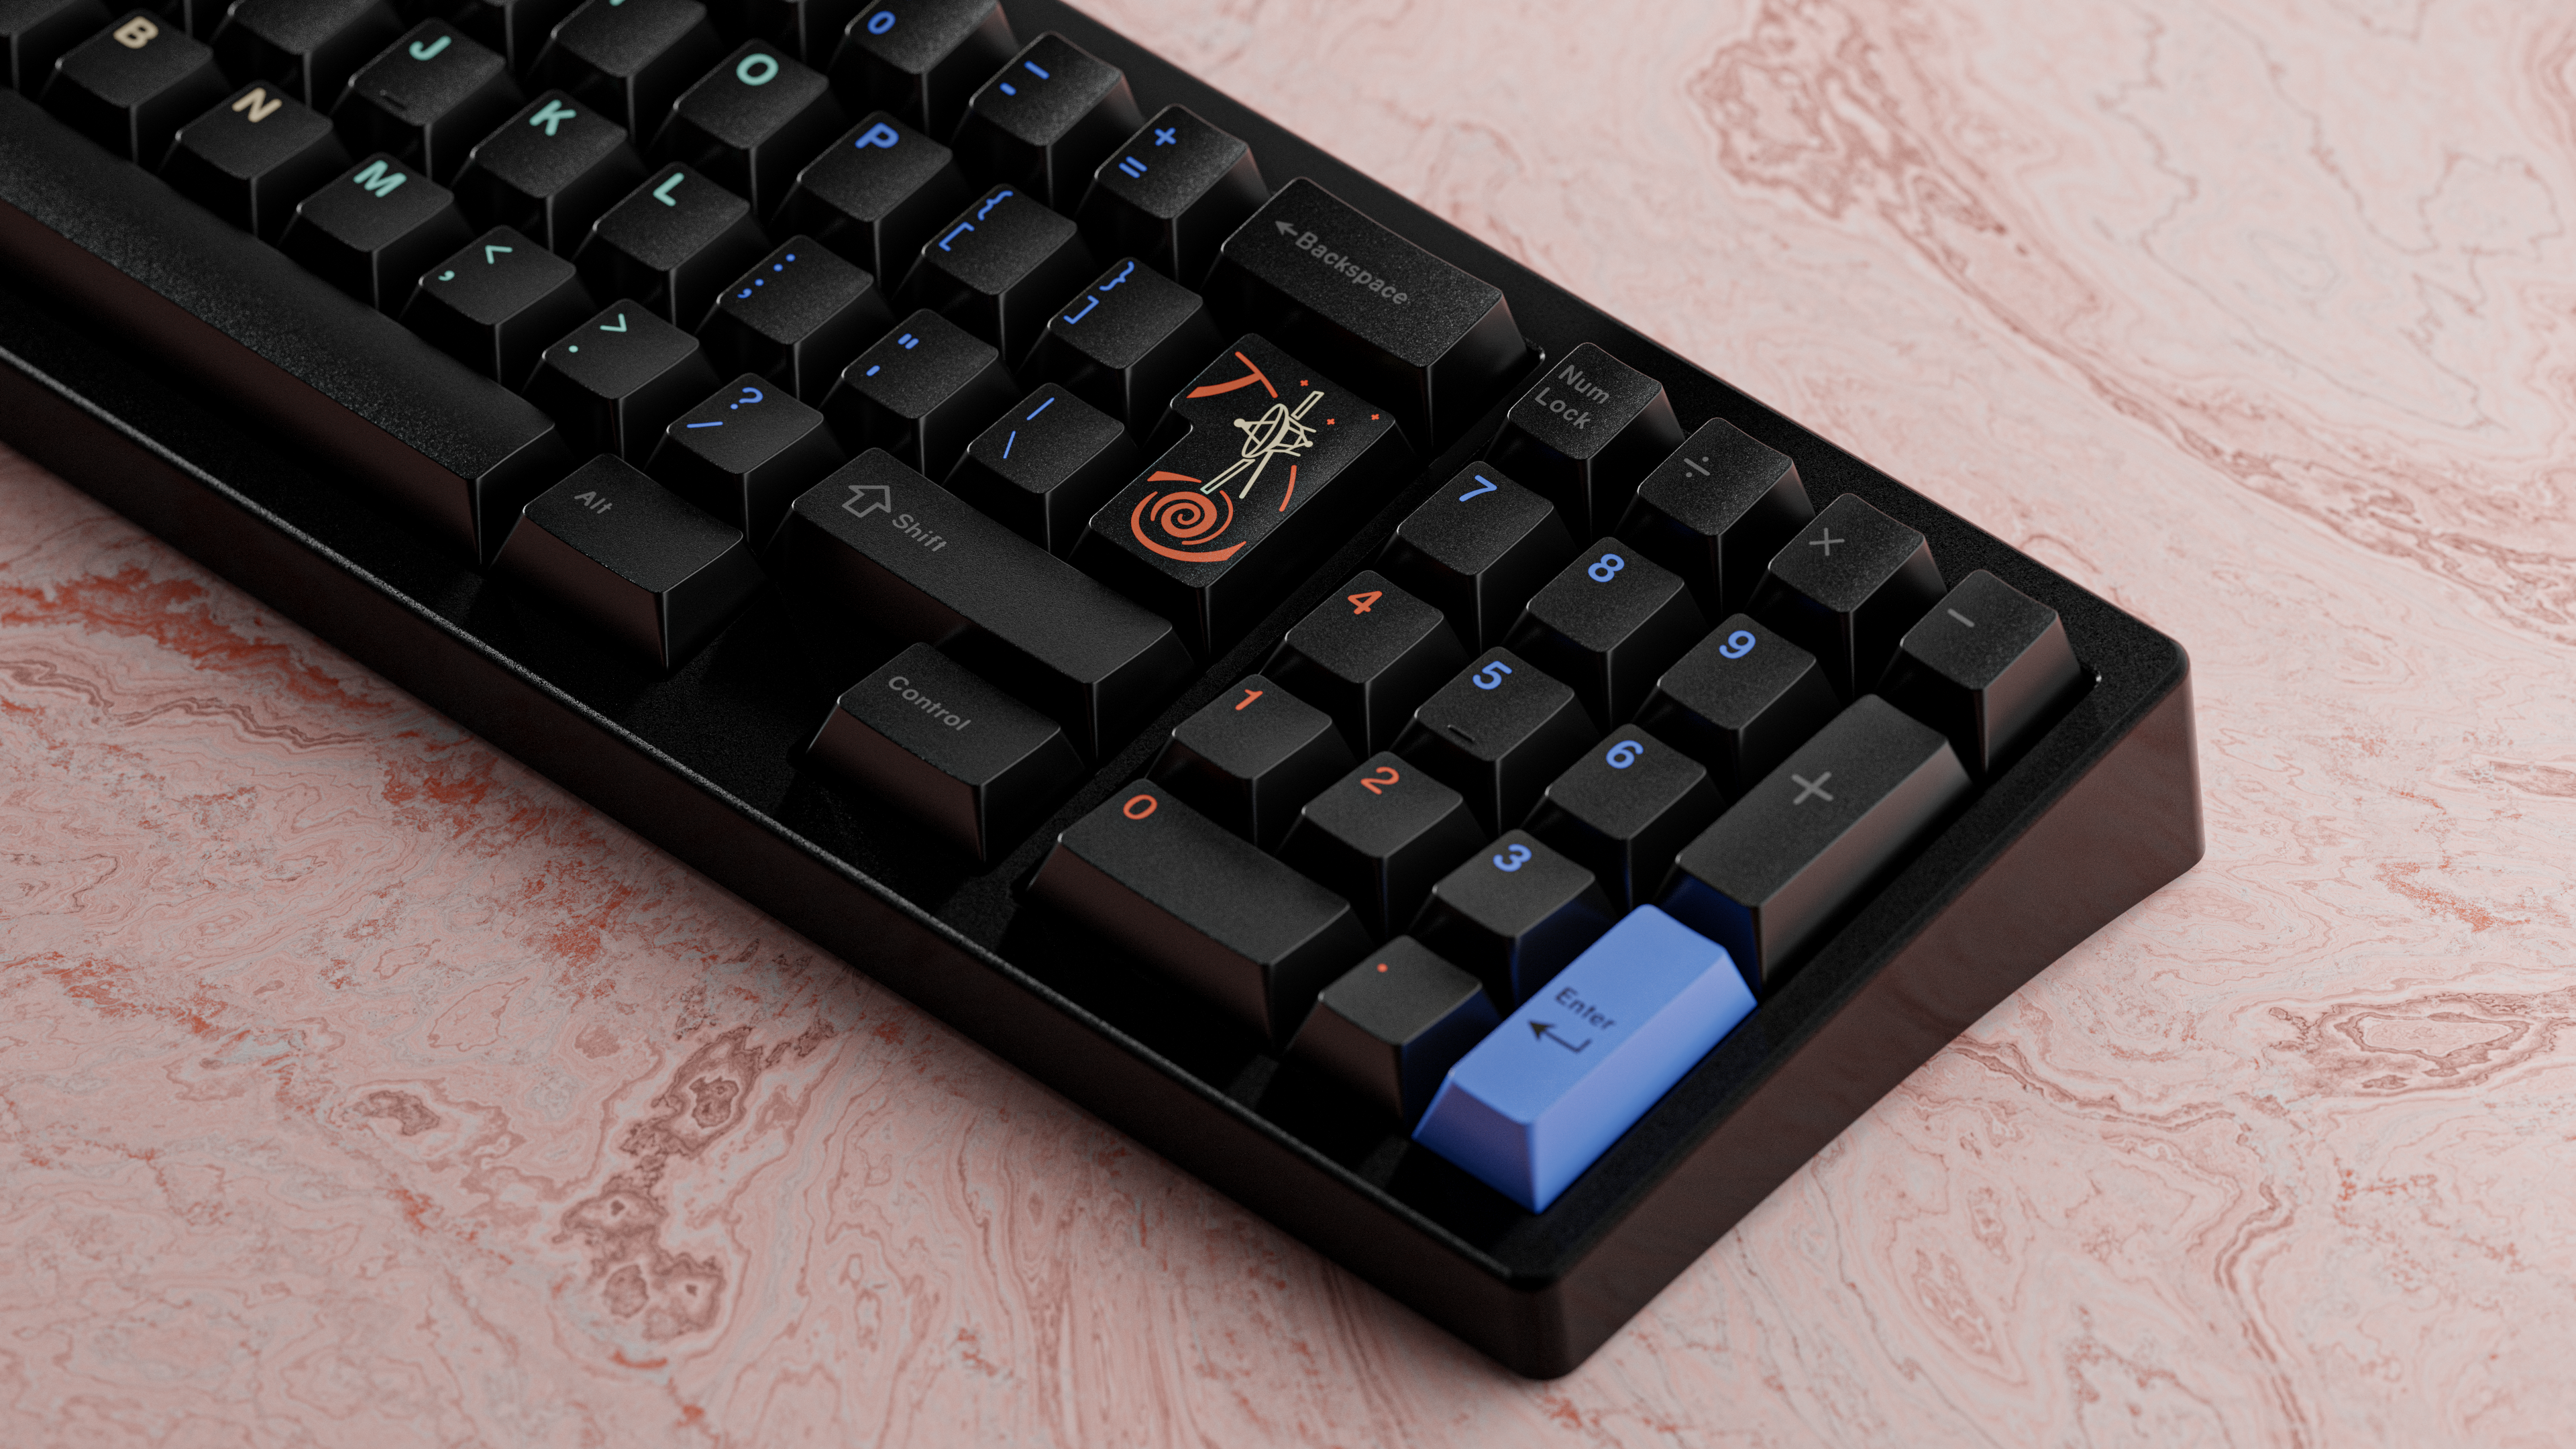 KKB Outer Bounds Keycaps - Group-Buy